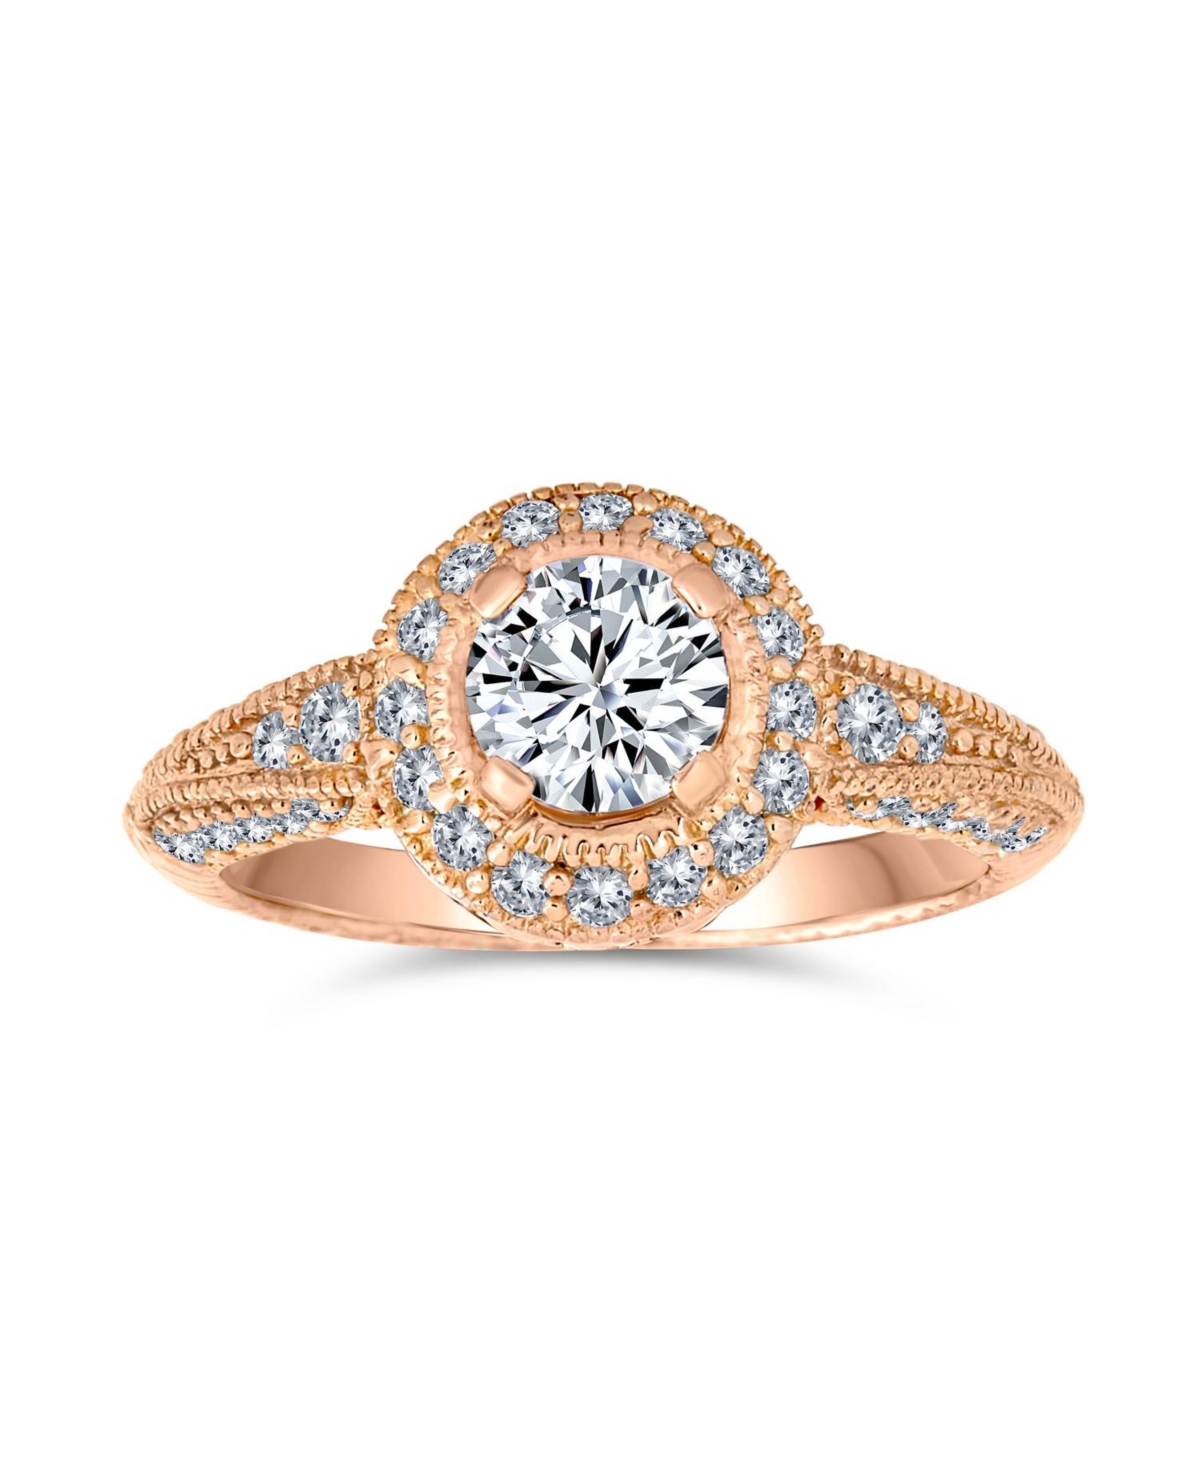 Art Deco StyleMilgrain Edge Halo Aaa Cubic Zirconia Circlet Round Solitaire Engagement Ring Rose Gold Plated .925 Sterling Silver - Rose